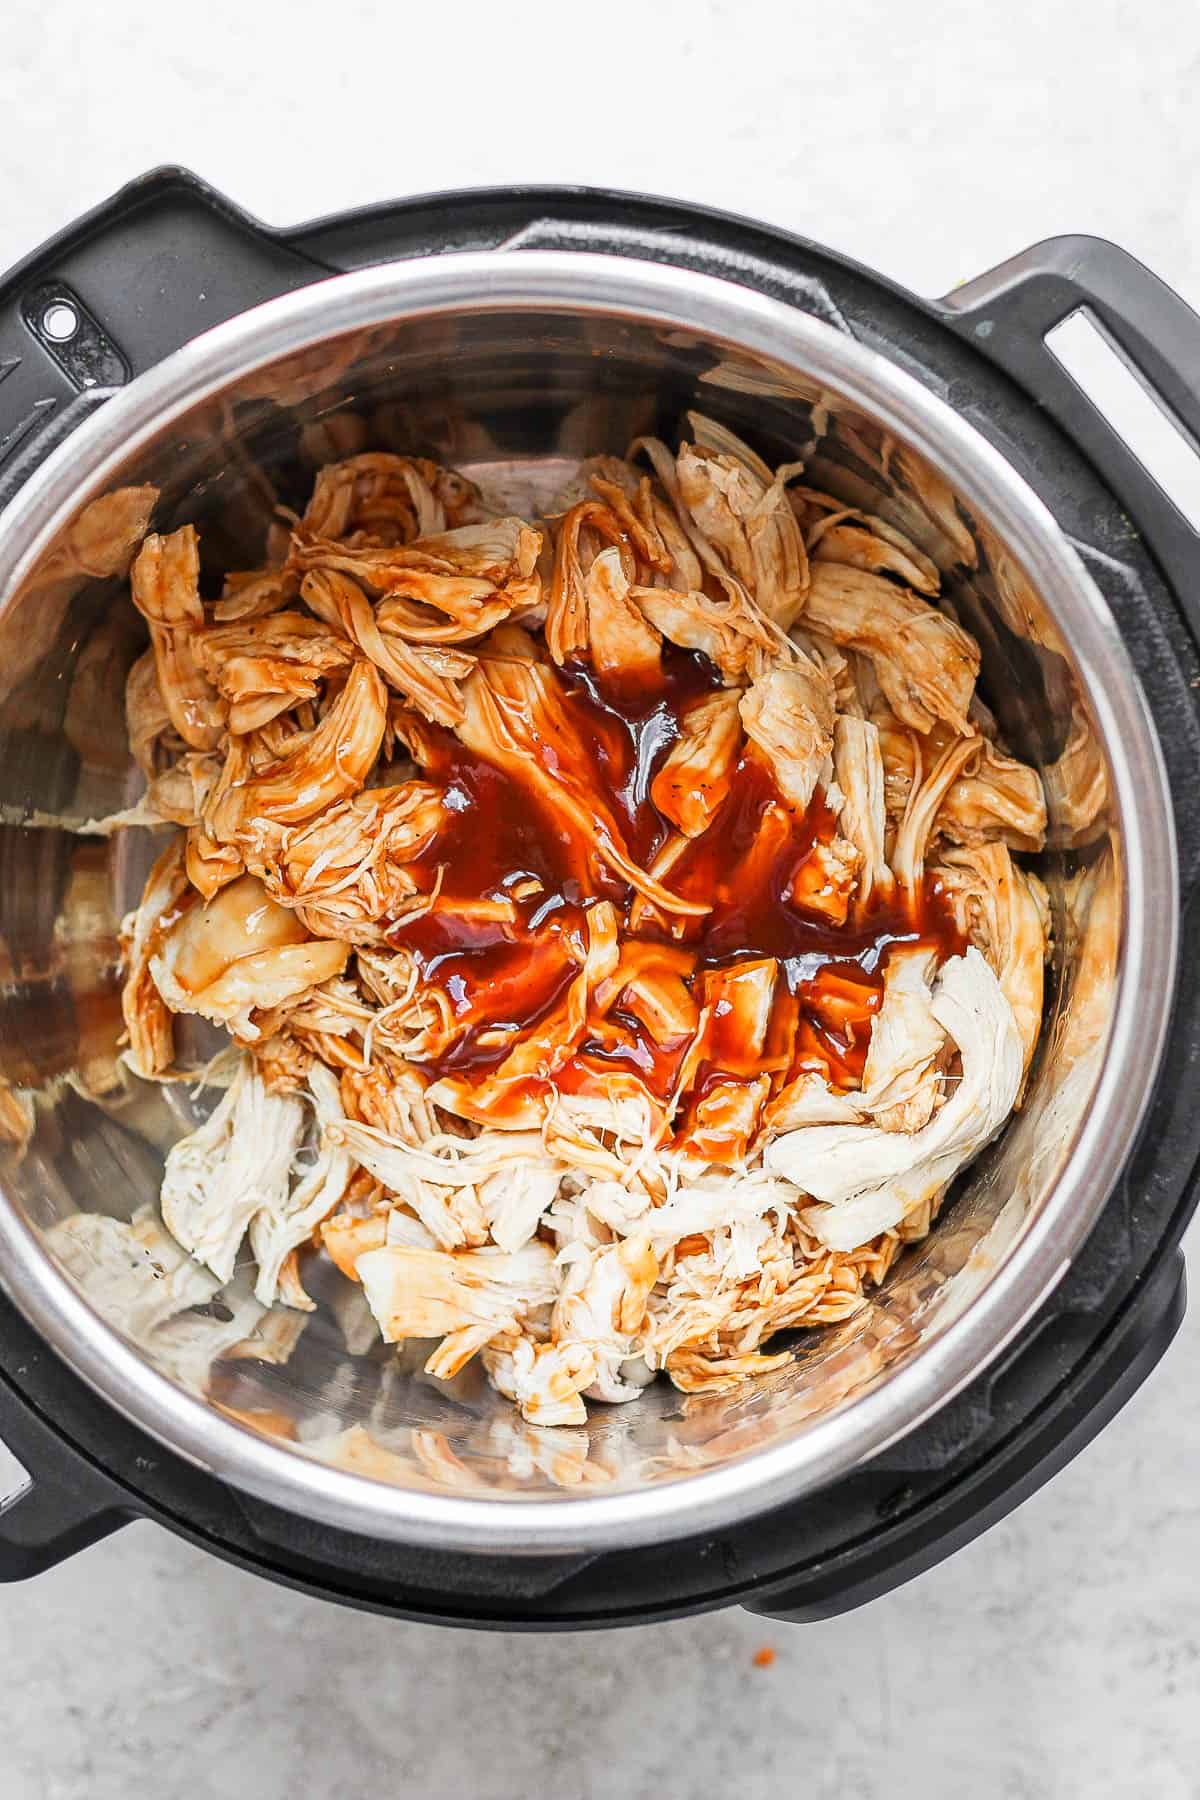 Shredded chicken in an instant pot with some bbq sauce added.